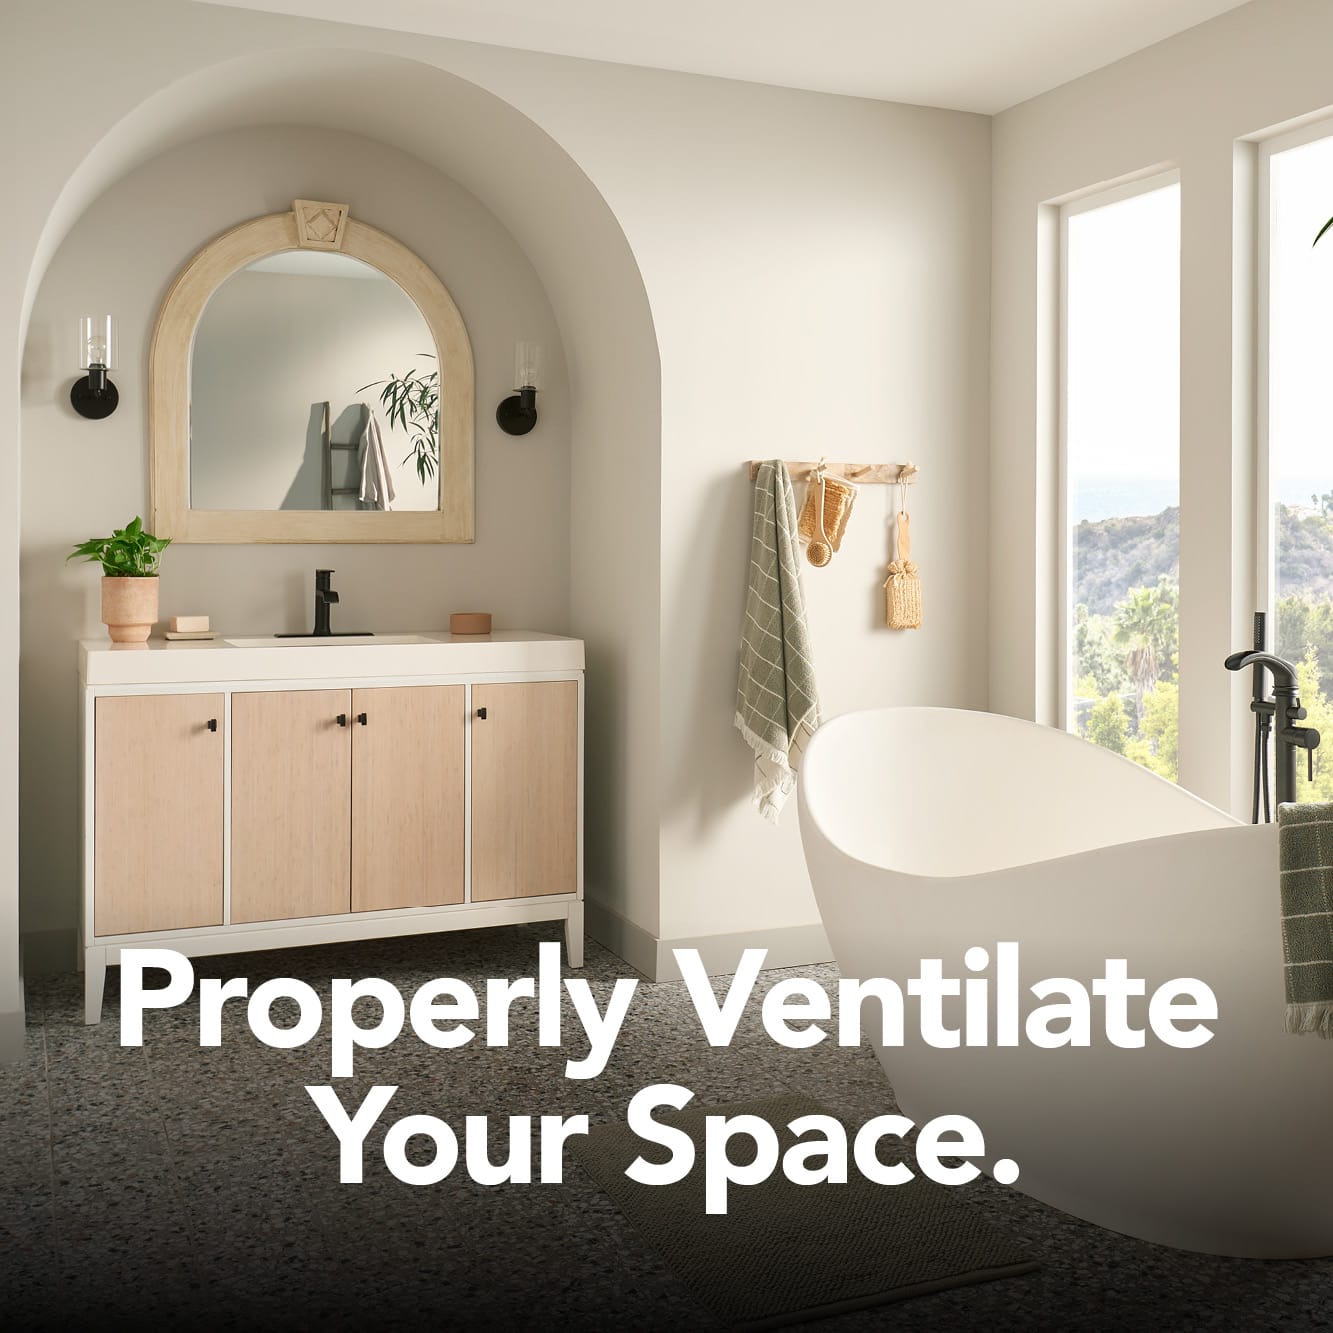 Ventilate your bathroom or powder room while you spend time getting ready or taking a bath.